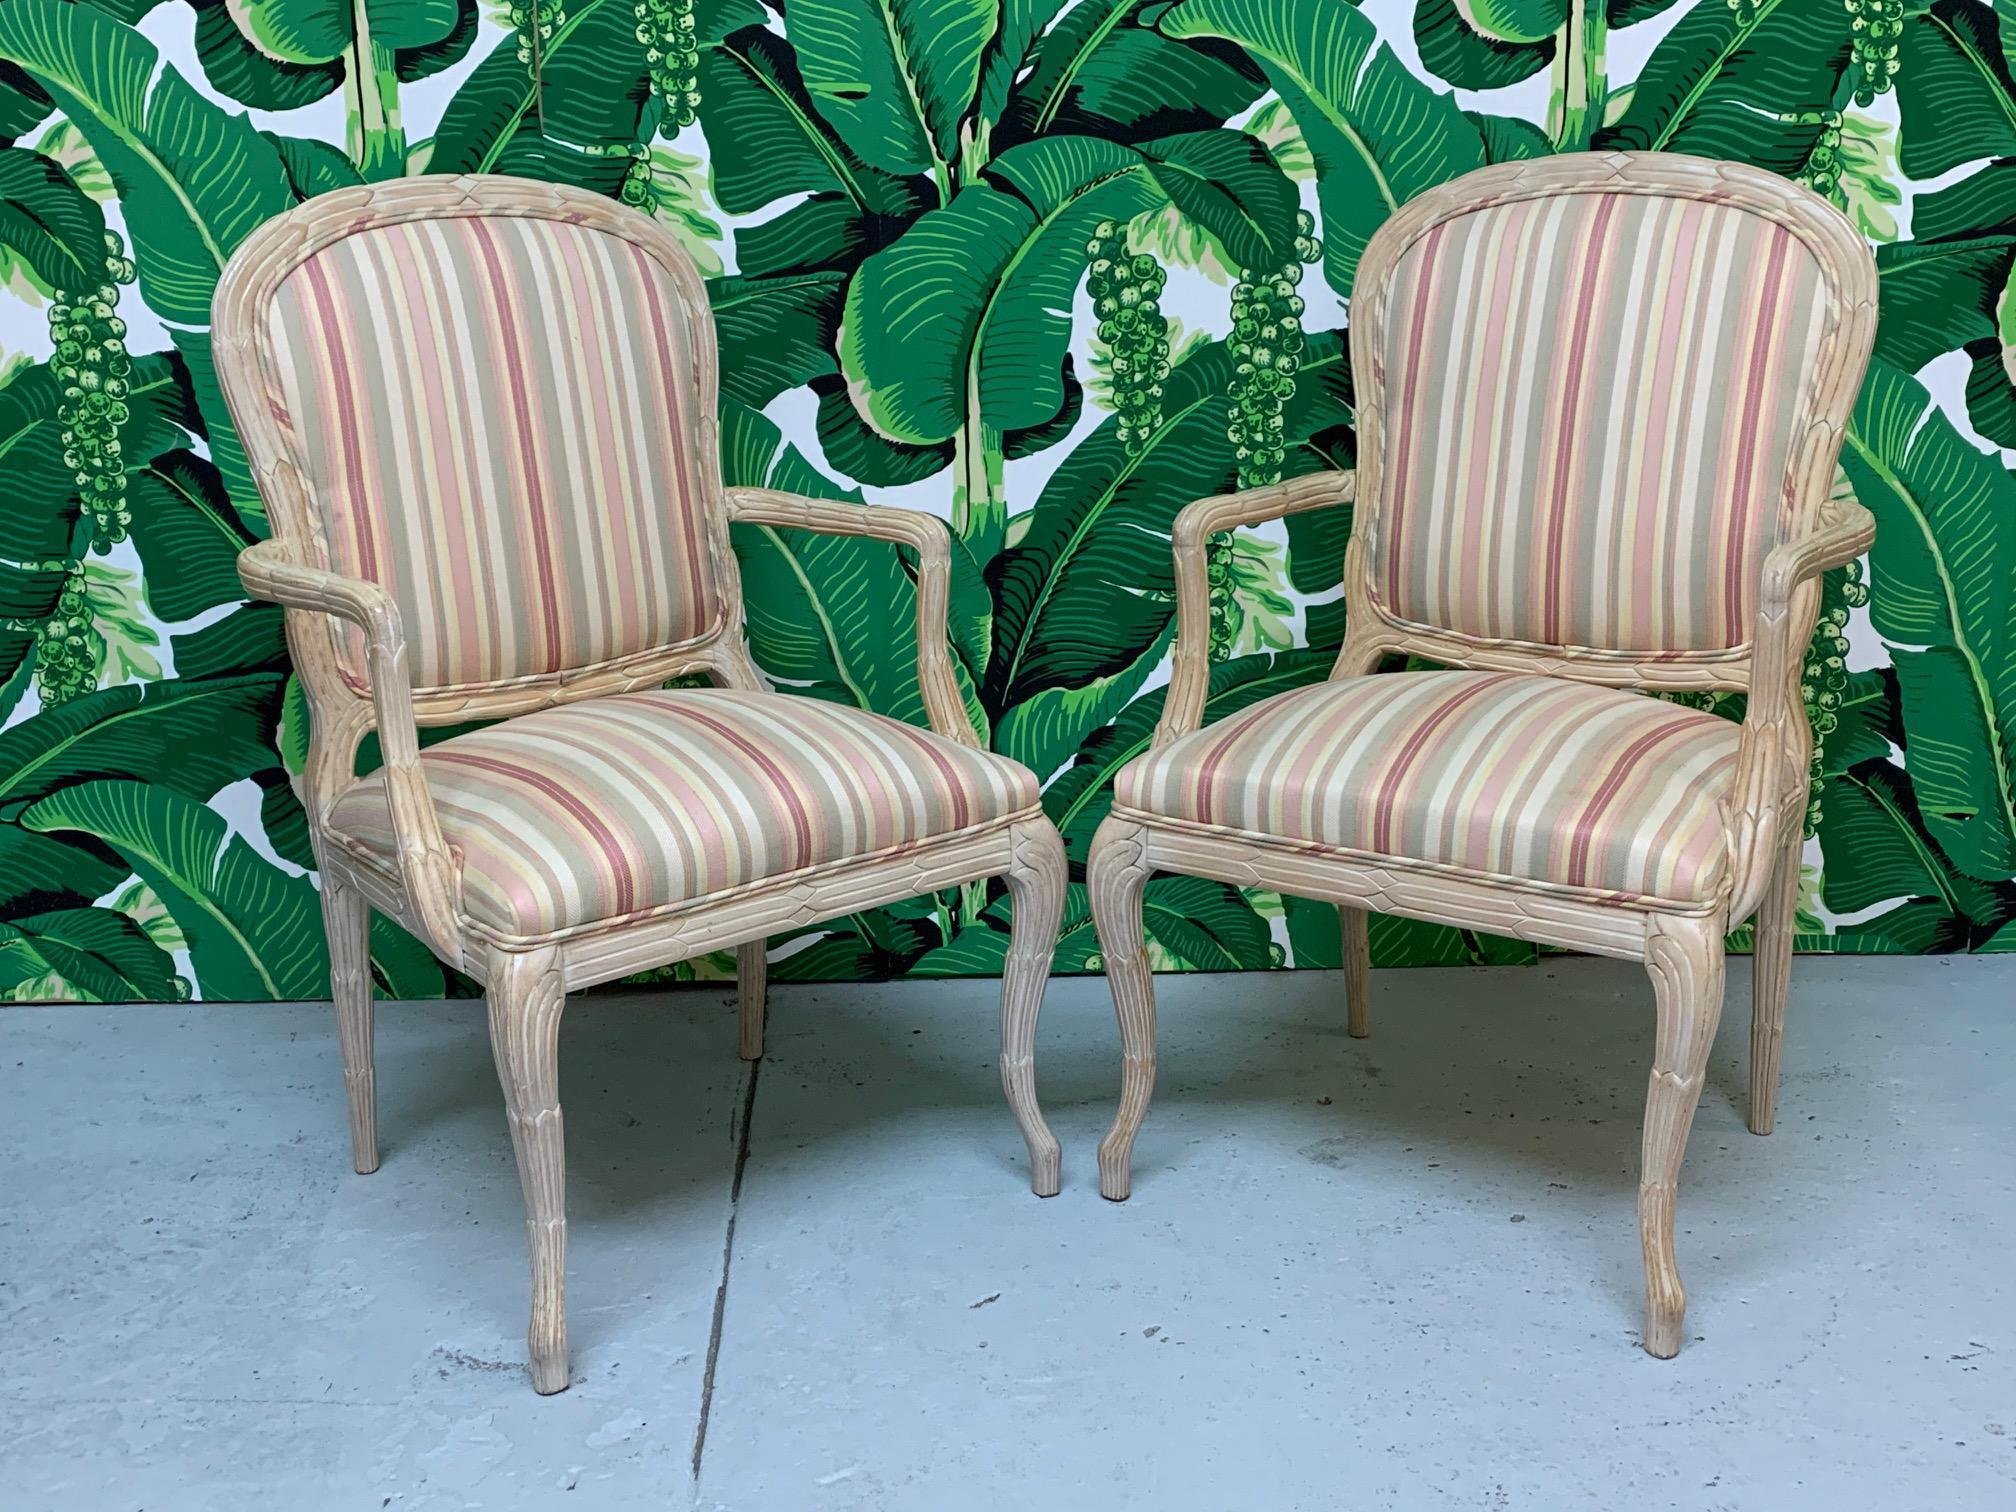 Pair of vintage faux bois twig style carved dining chairs. Upholstered in a striped pattern with frames in the classic twig style. Attributed to Century Furniture Co. This listing is for the pair. If interested in purchasing more, message us. Good